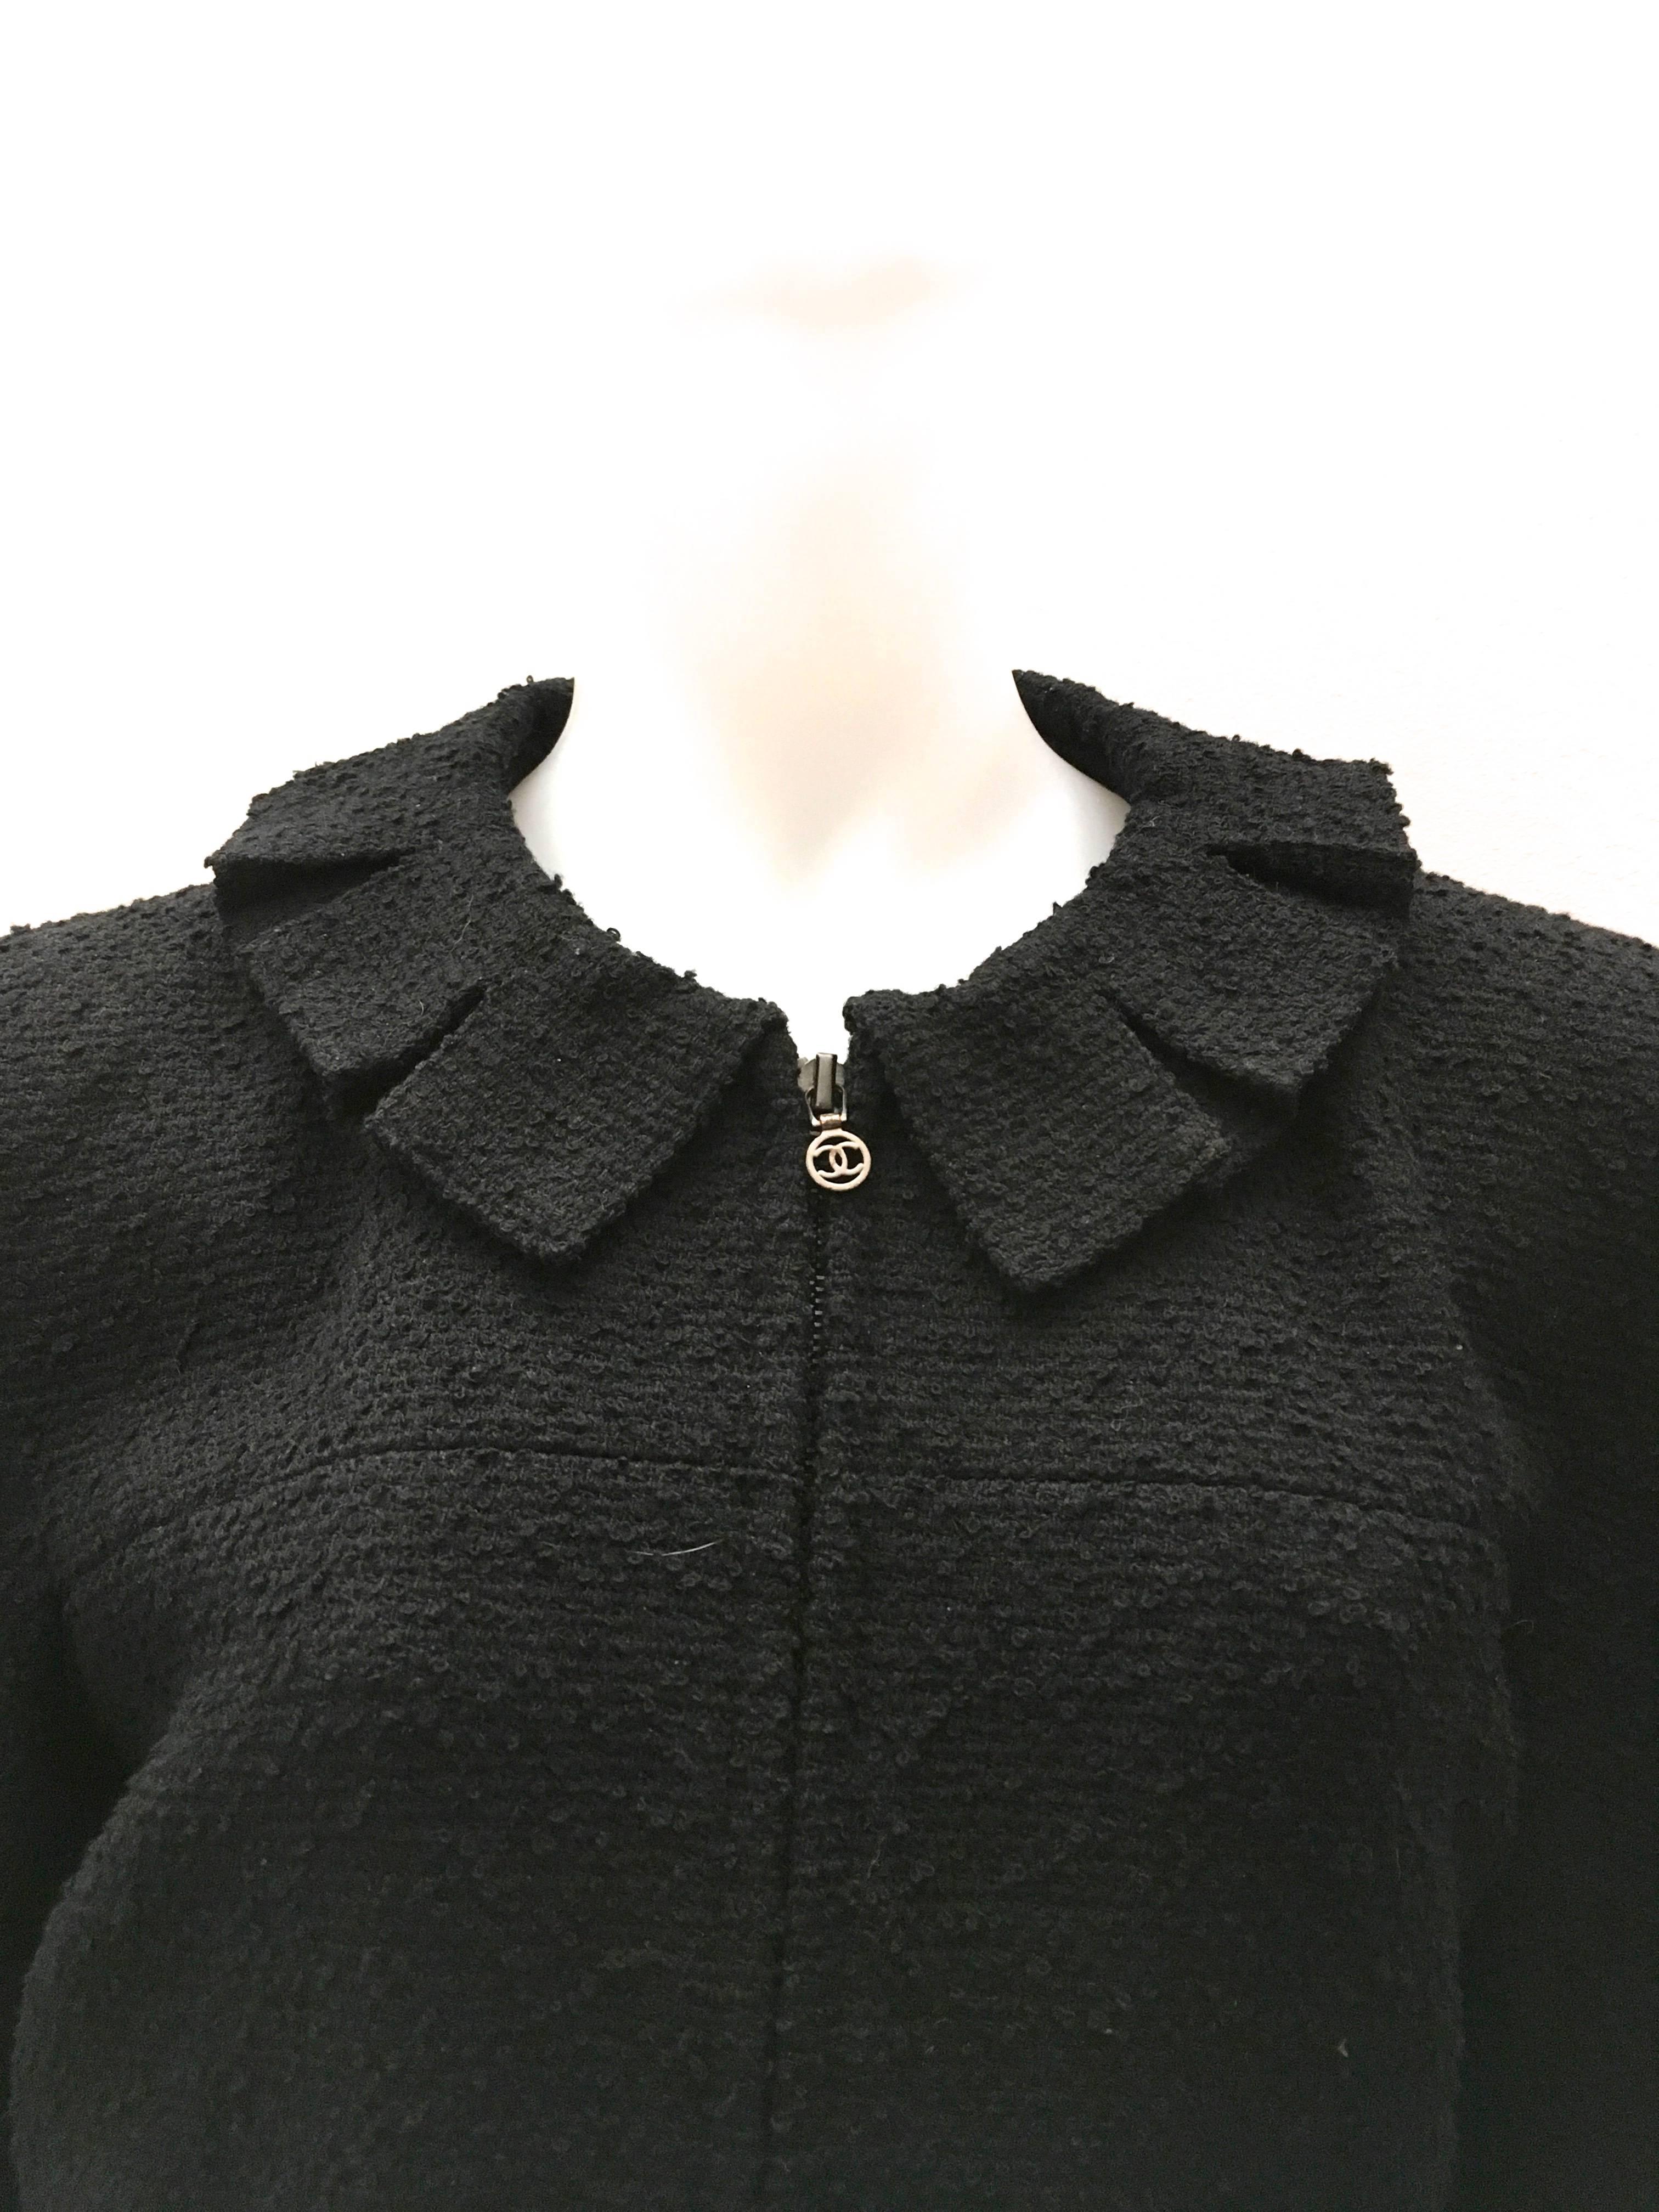 Presented here is a magnificent Chanel black boucle jacket from the 1997 Fall Collection. The size listed on the tag is 42, but please pay close attention to the measurements, because my best guess is that it has been altered and is closer to a size